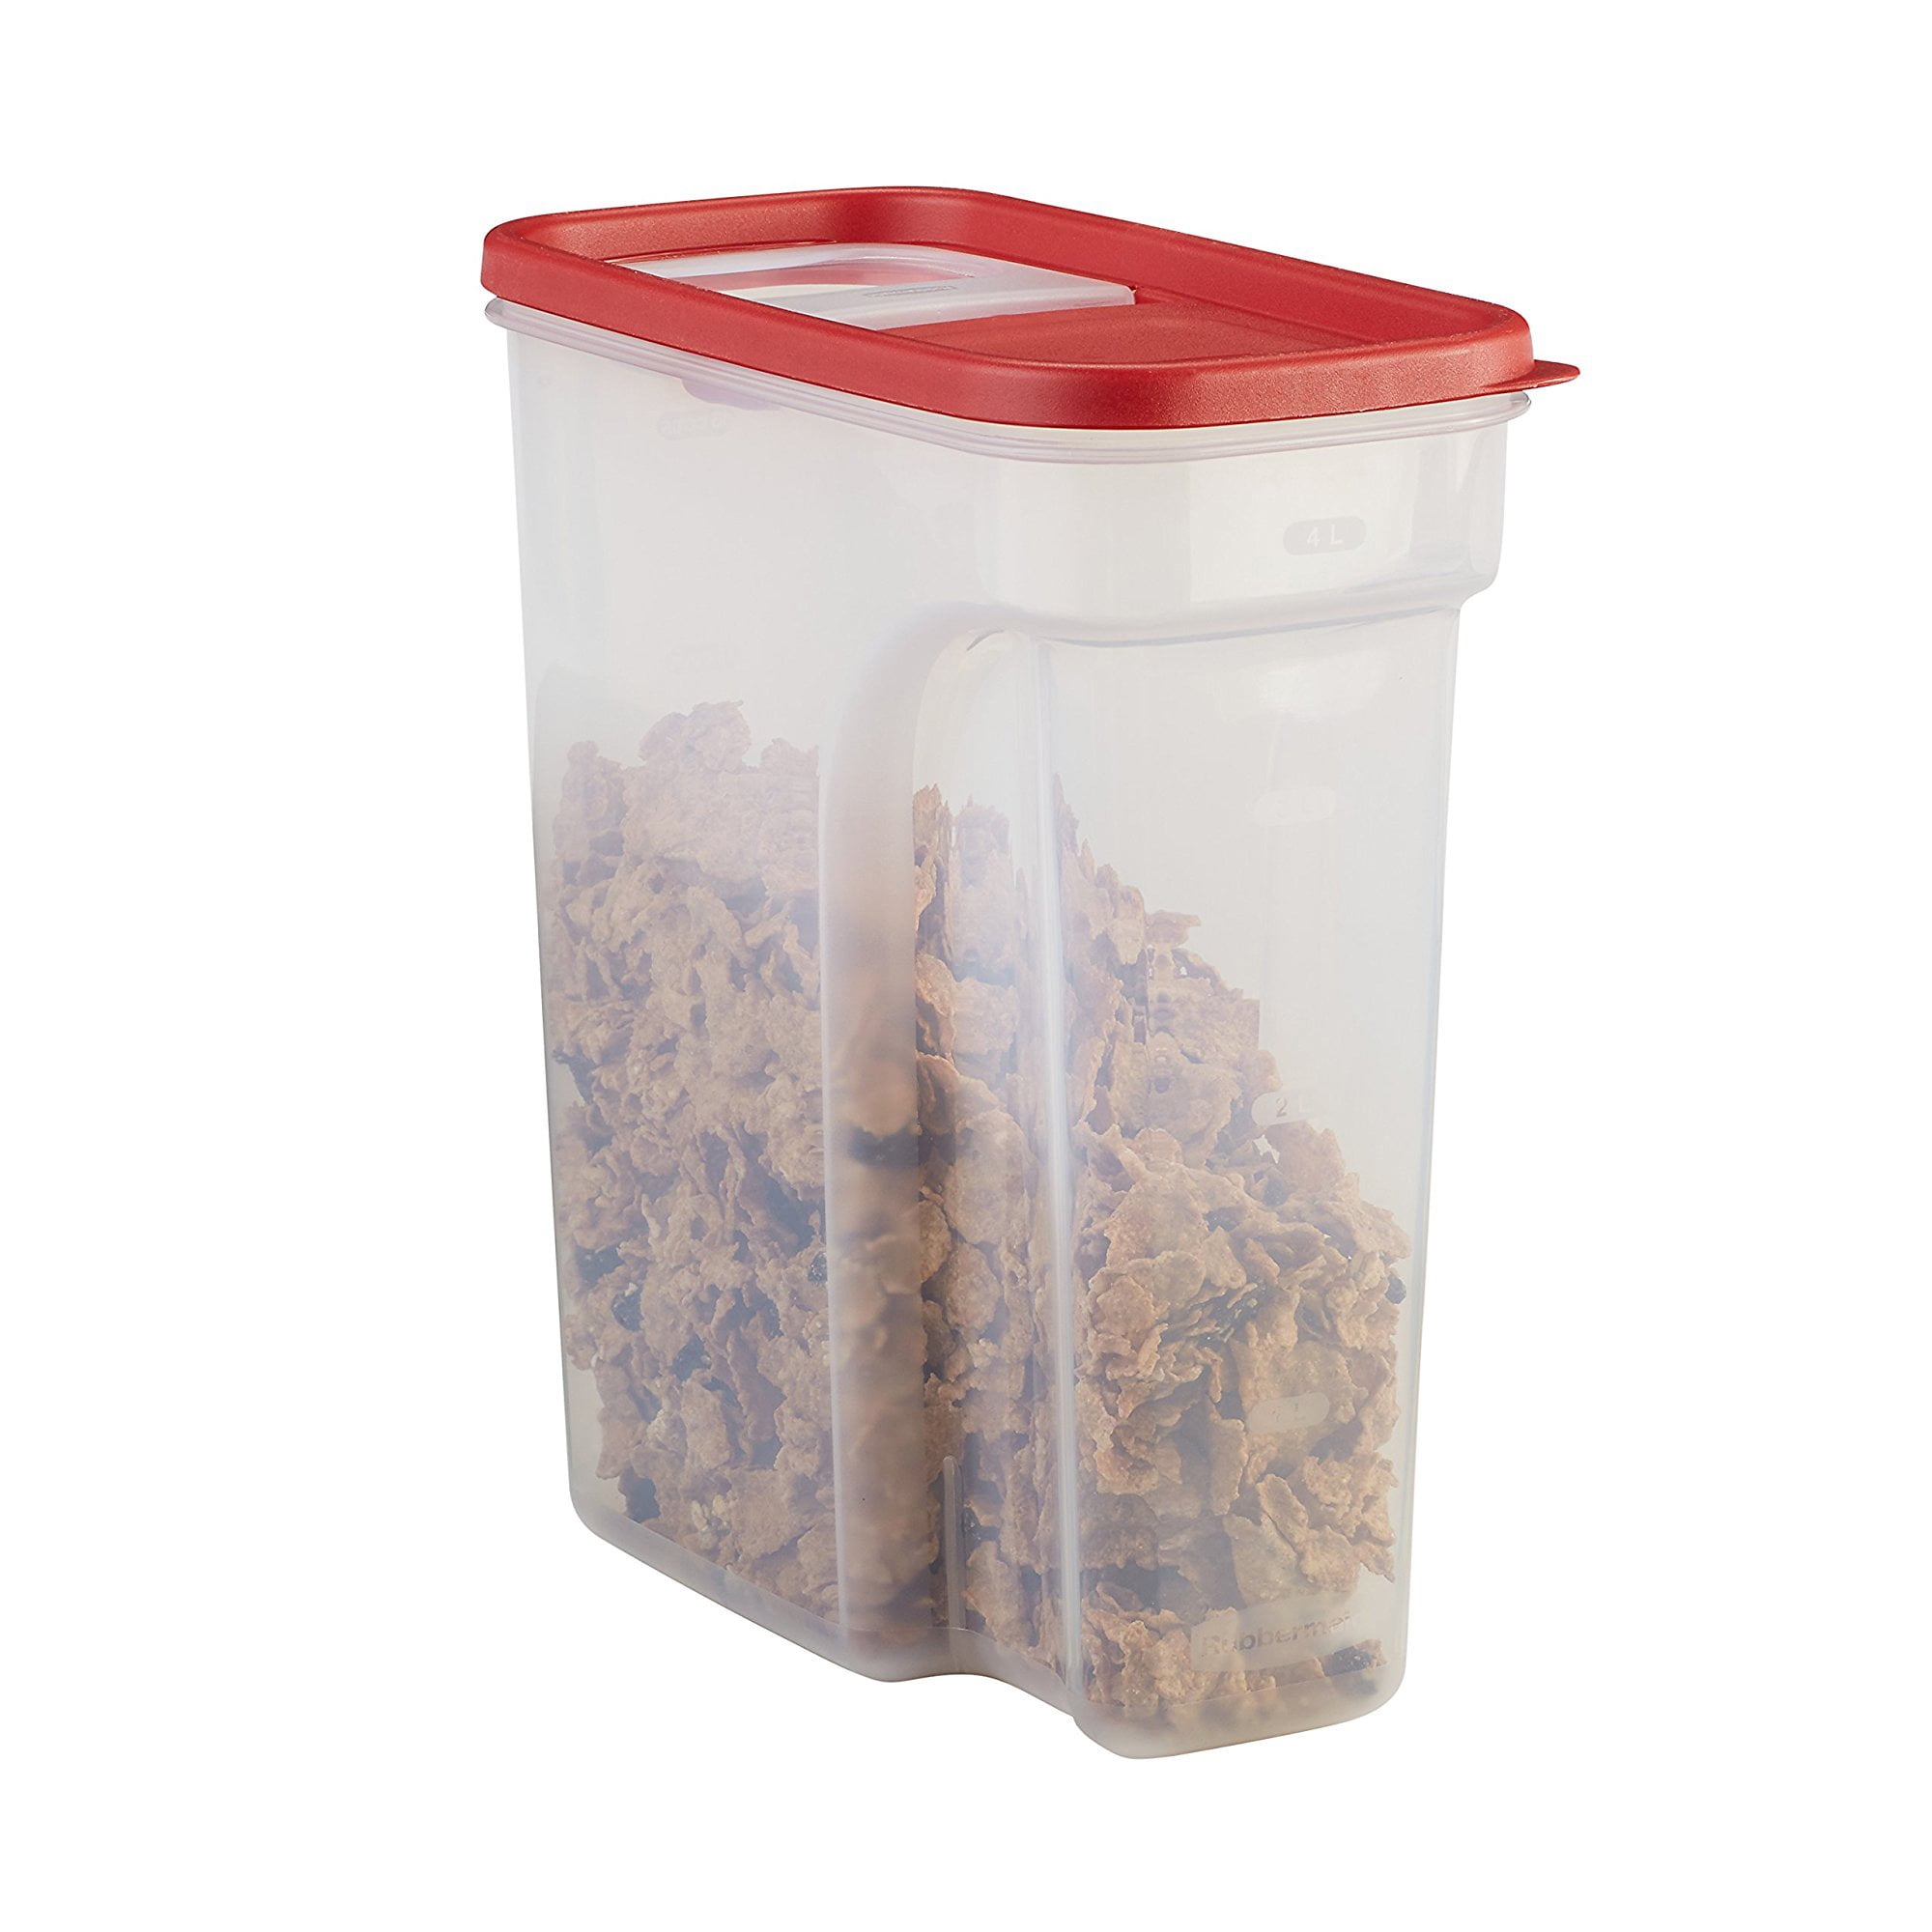 Rubbermaid Modular Cereal Containers, Clear/Red, 9.5 W x 3.75 D x 10.4 H